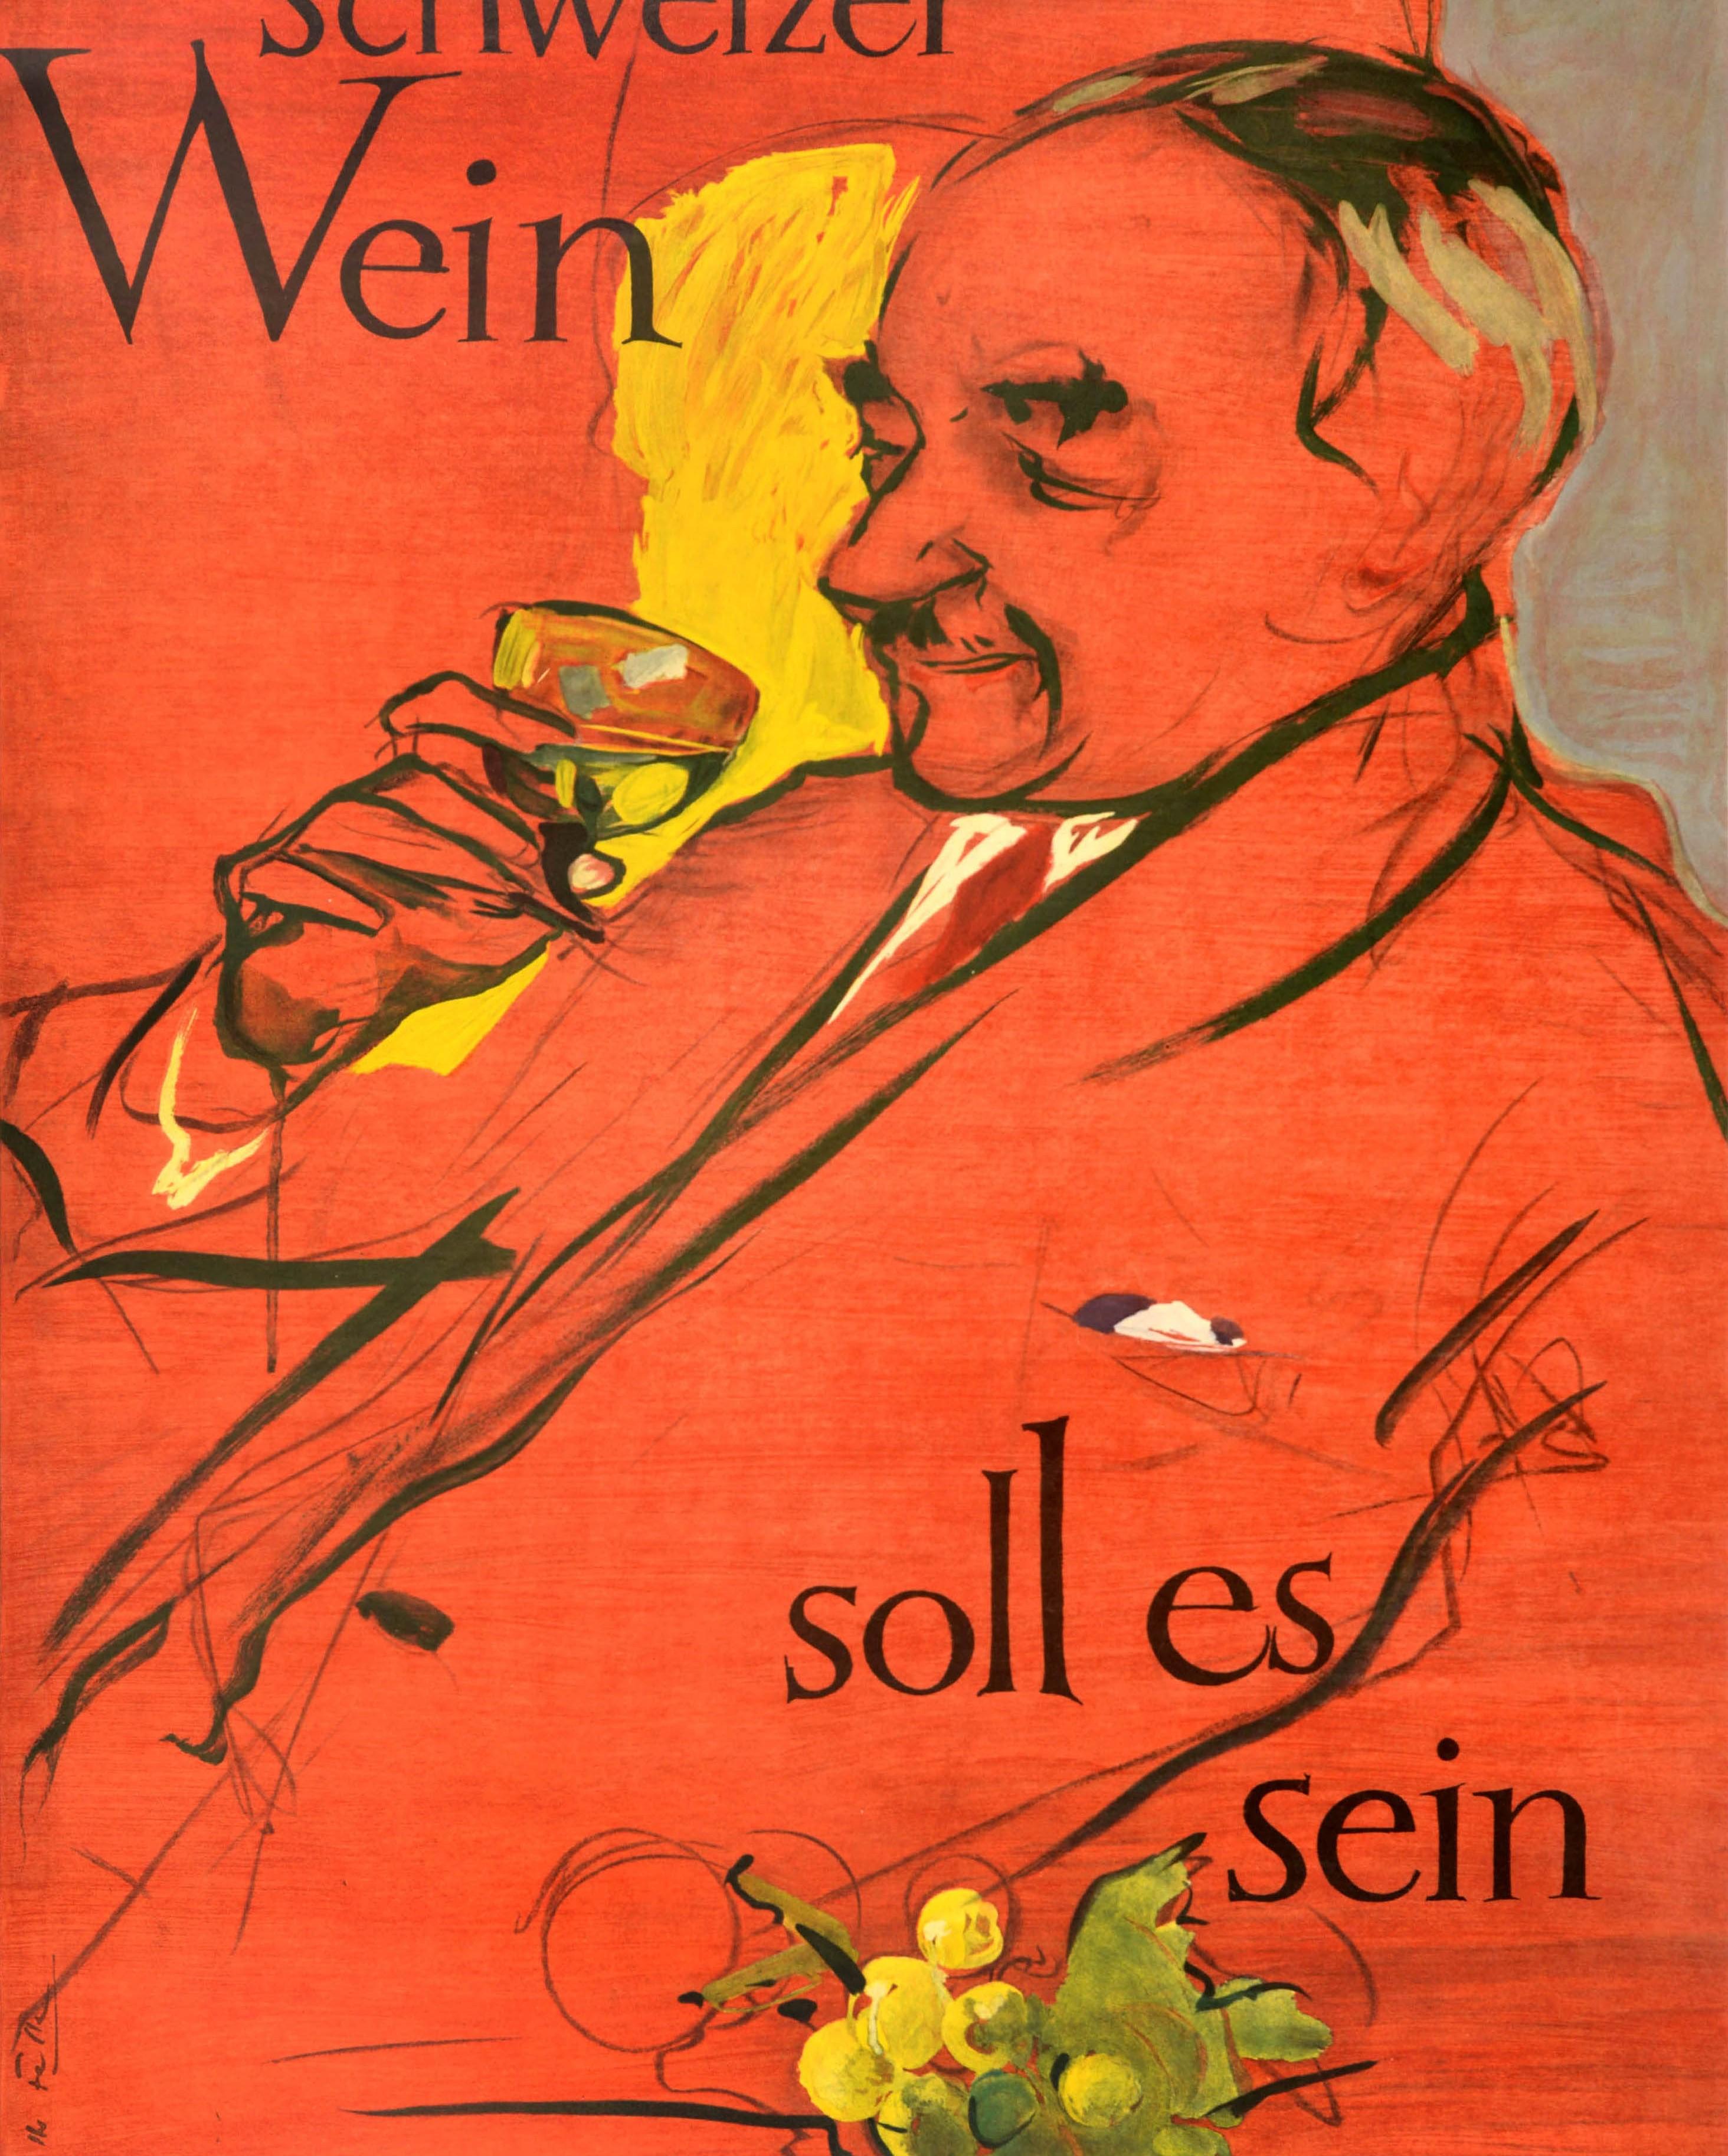 Original vintage drink advertising poster - Schweizer Wein soll es sein / It should be Swiss wine - featuring an illustration against a red background by the notable artist Hans Falk (1918-2002) depicting a smartly dressed gentleman raising a glass